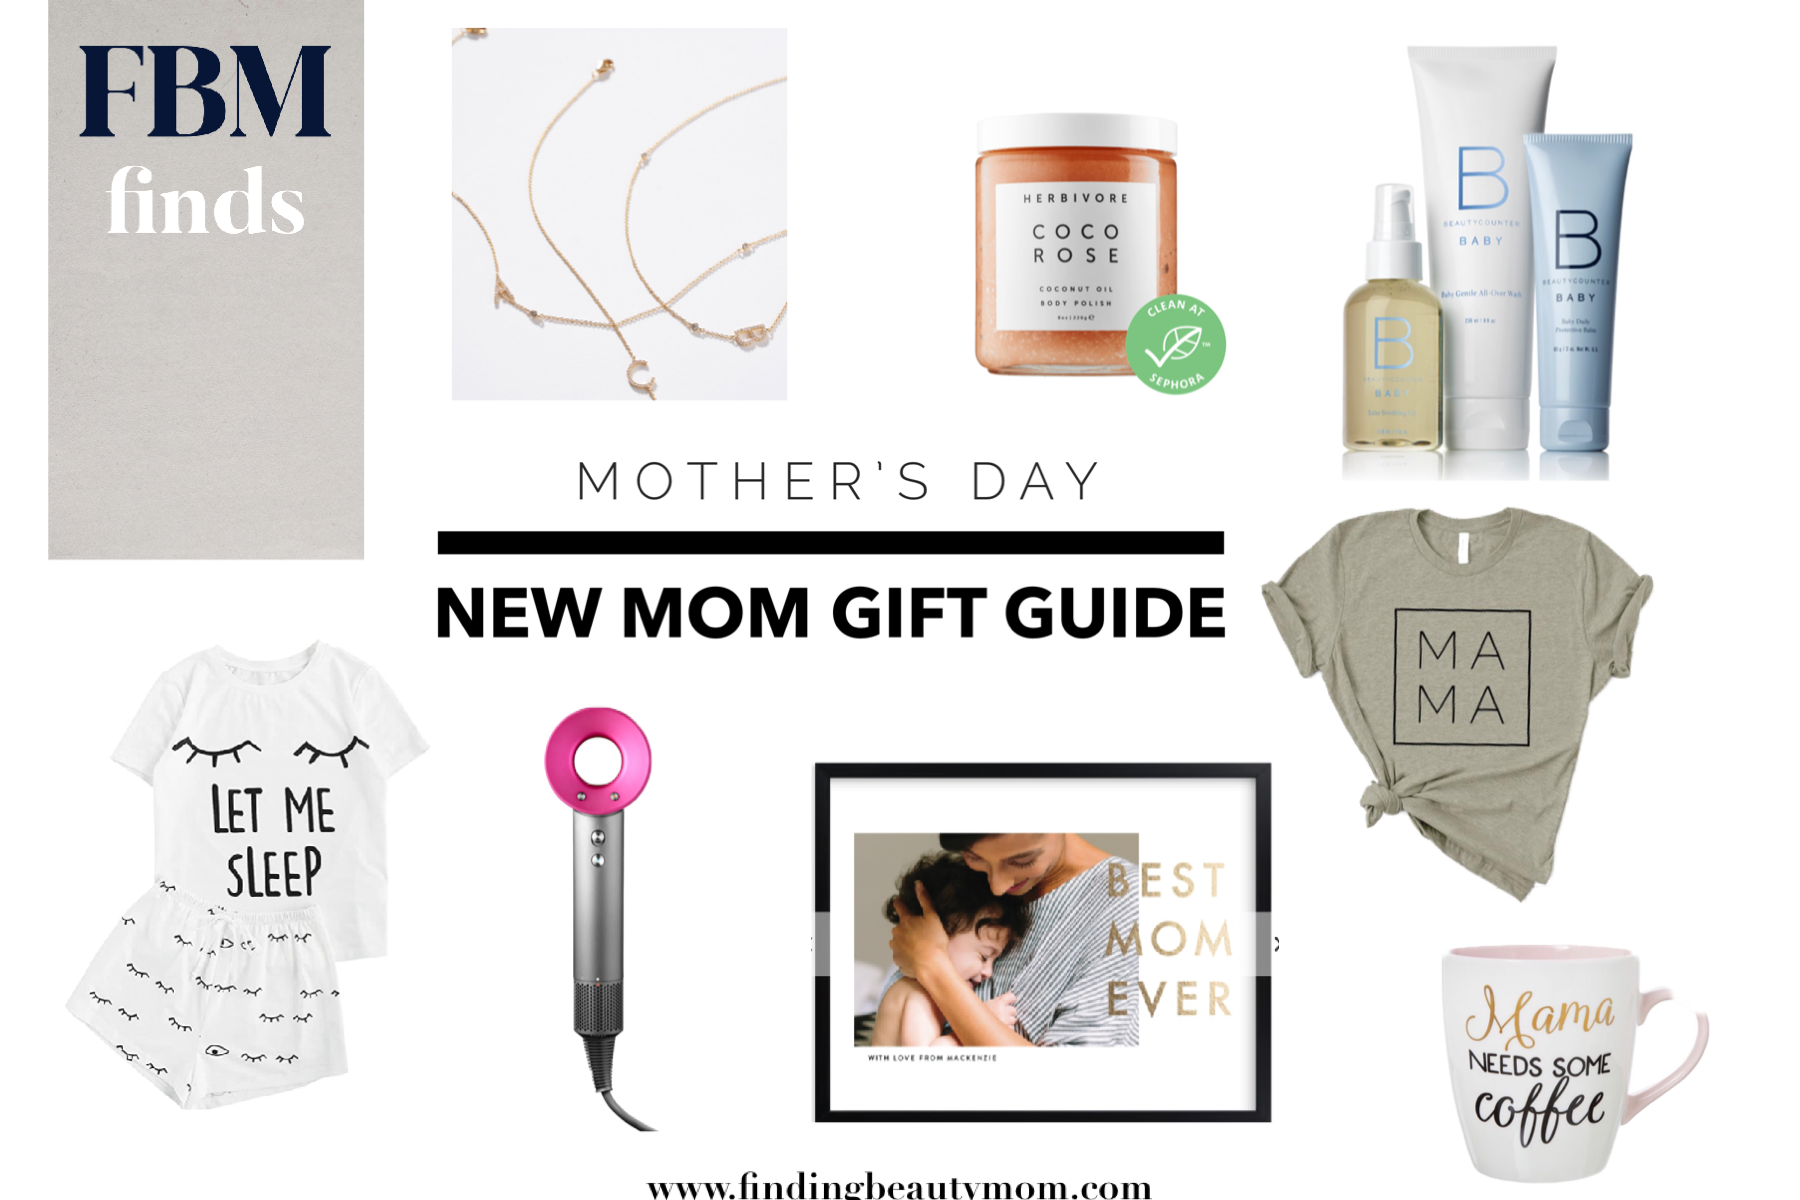 New mom gift guide, first Mother’s Day gifts